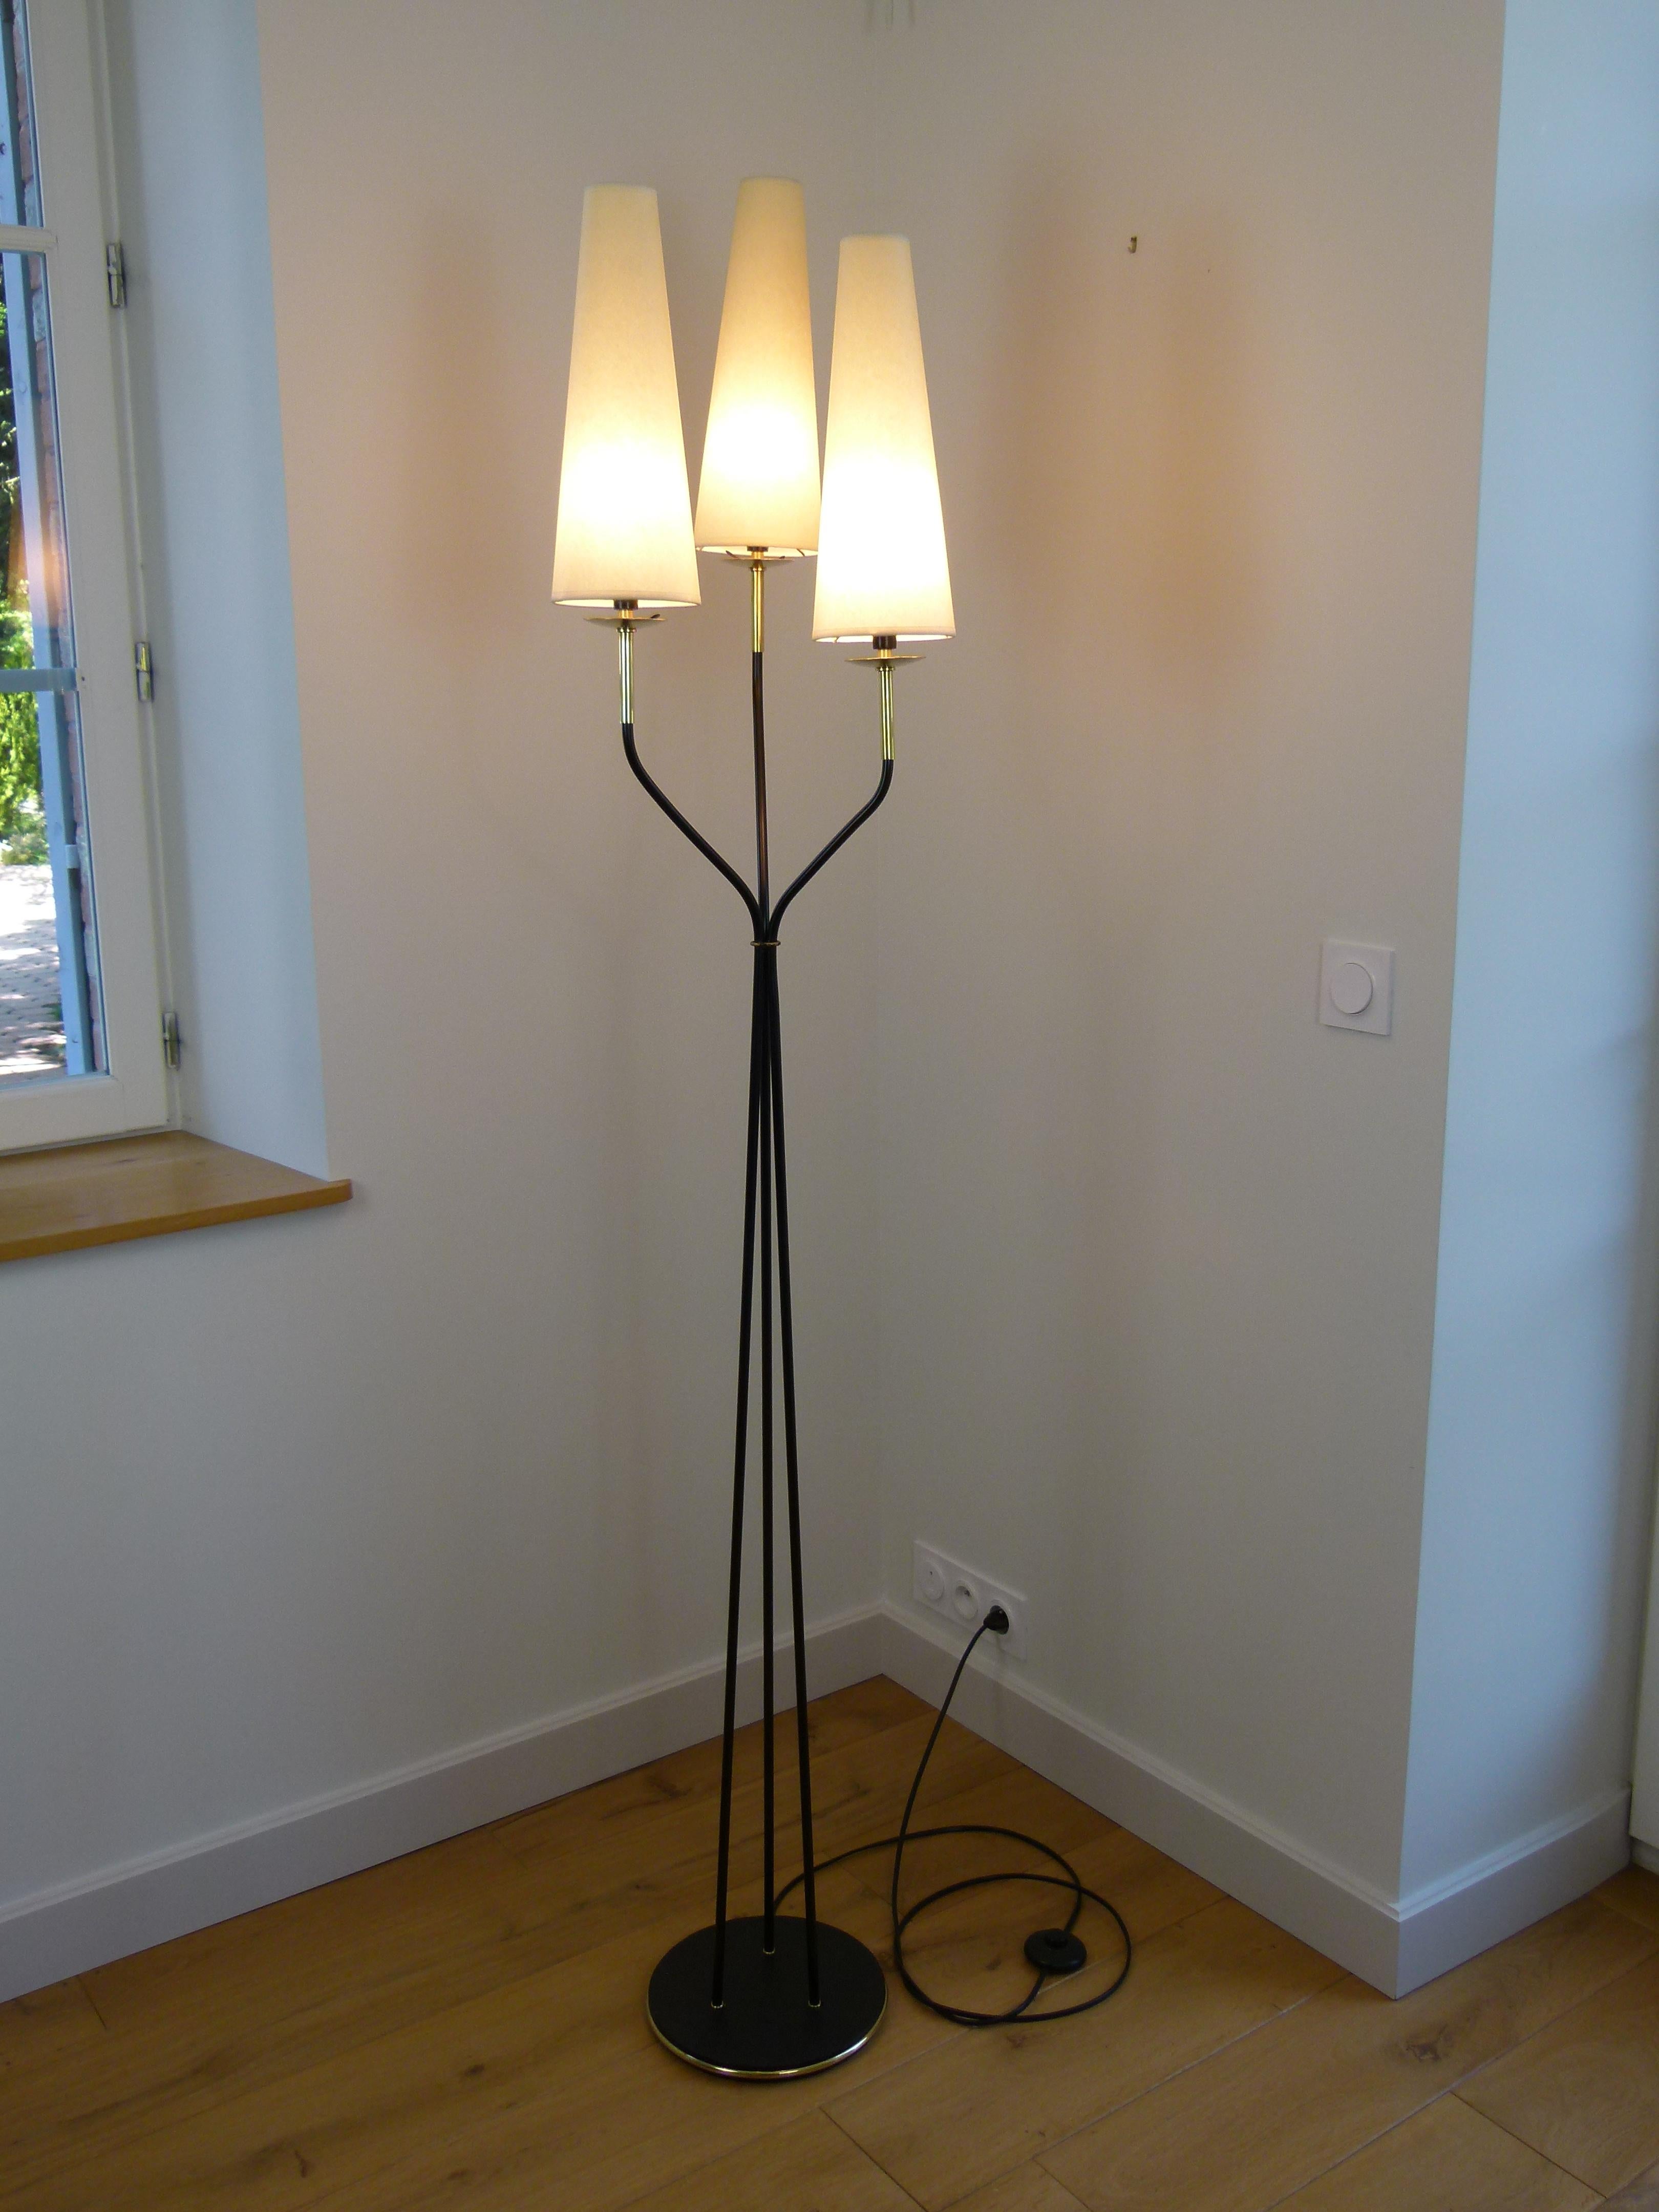 Mid-Century Modern Pair of 1950s Floor Lamp with Three Illuminated Arms by Maison Lunel